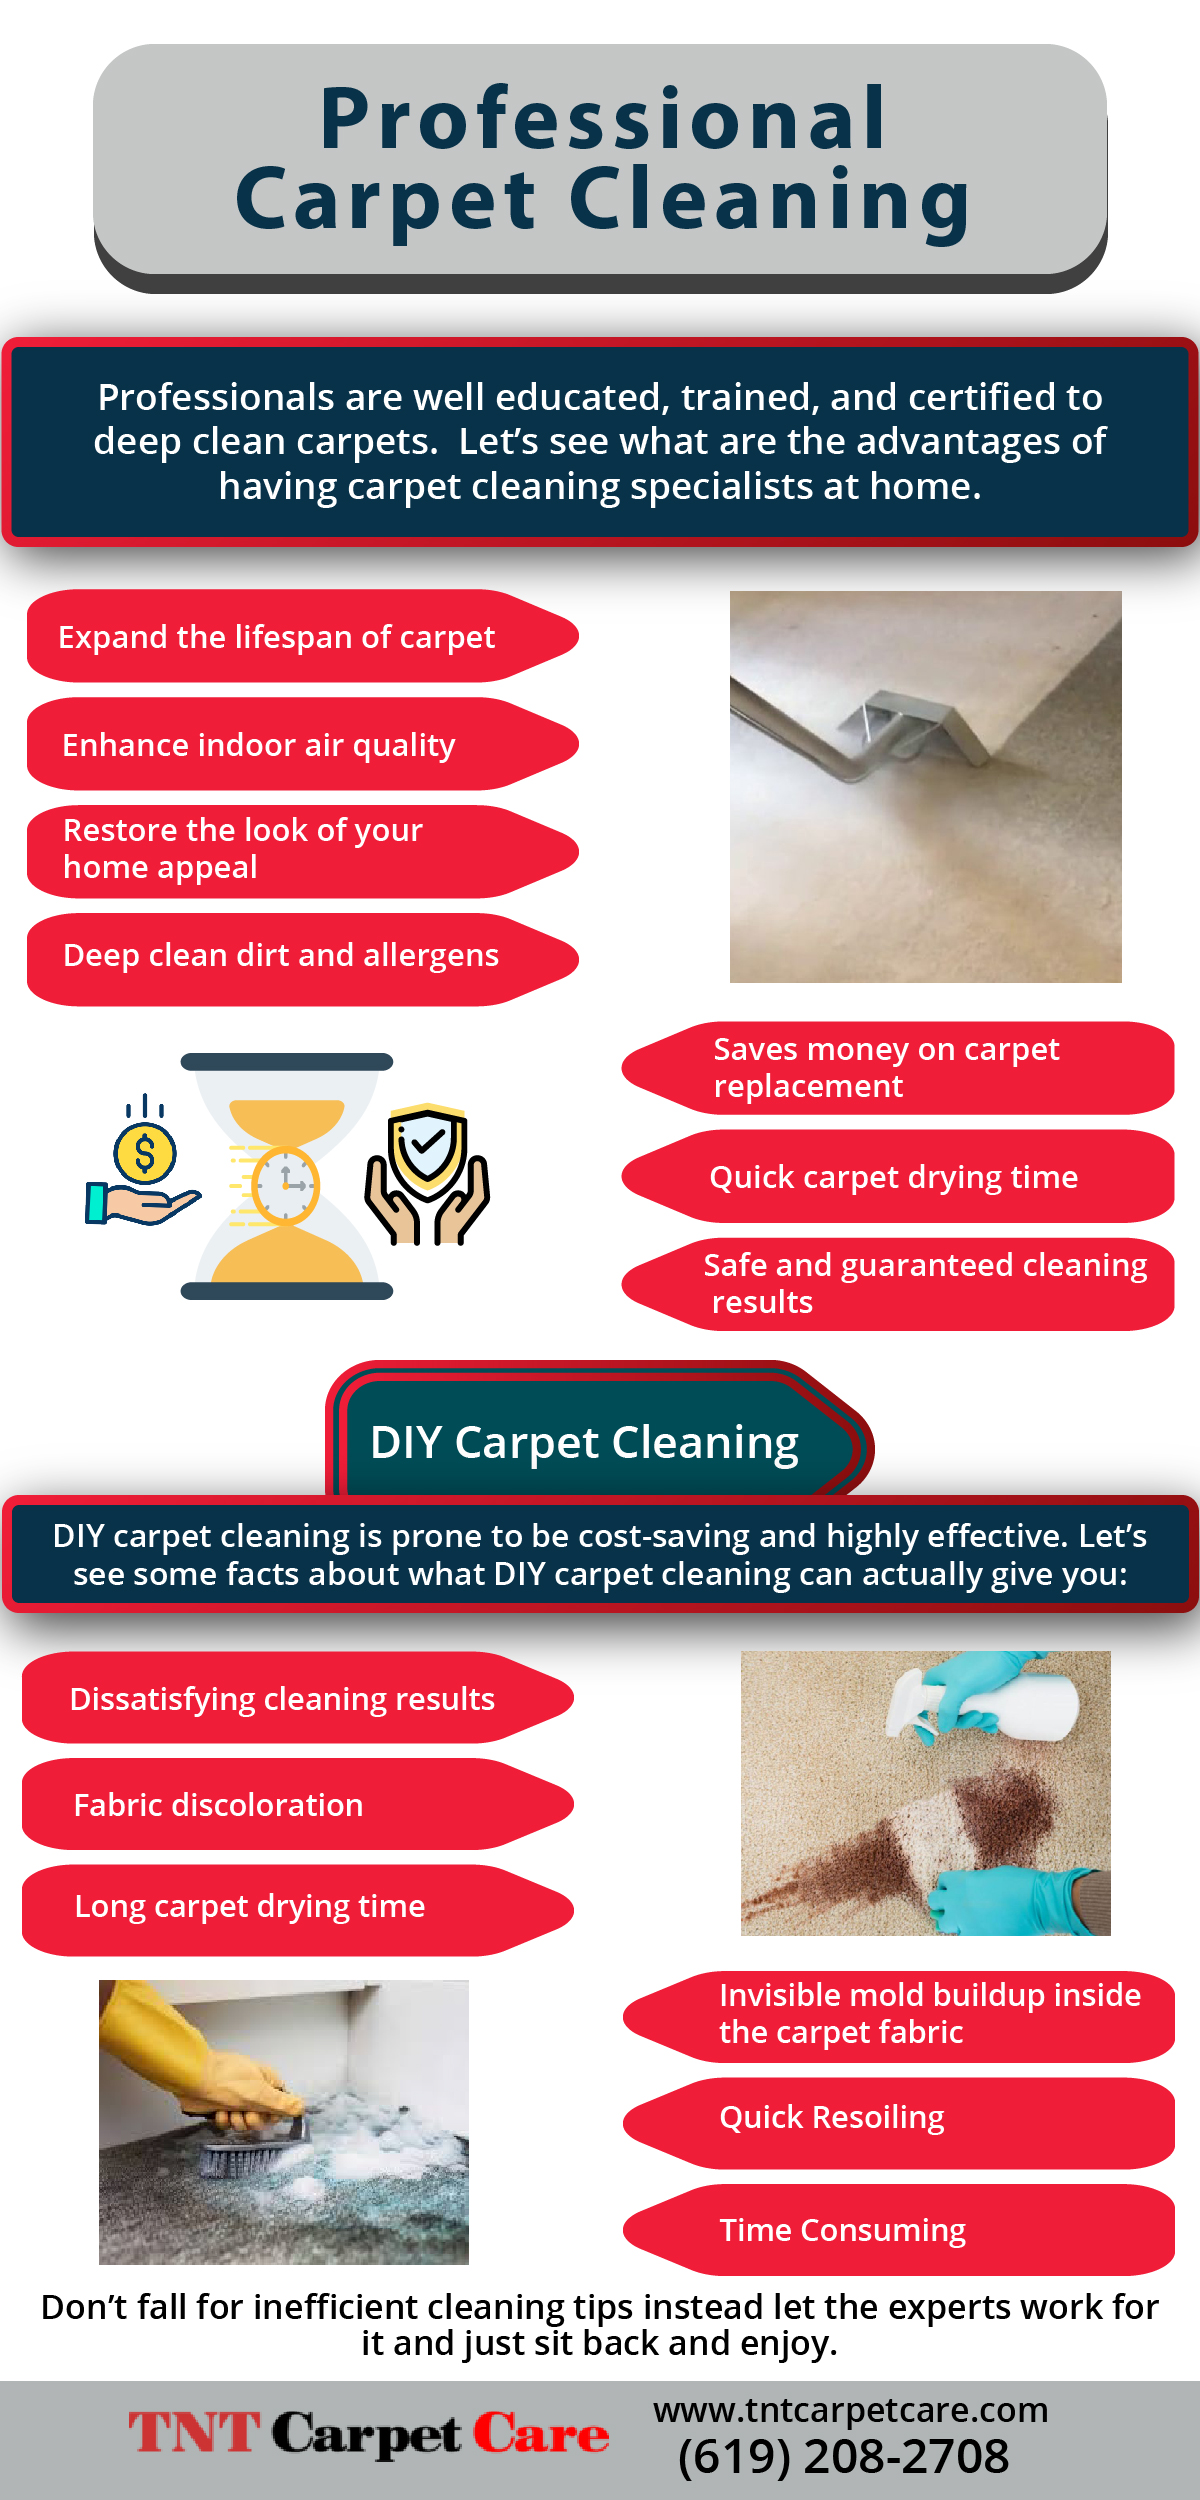 Professional Carpet Cleaning Vs Diy [Infographic]